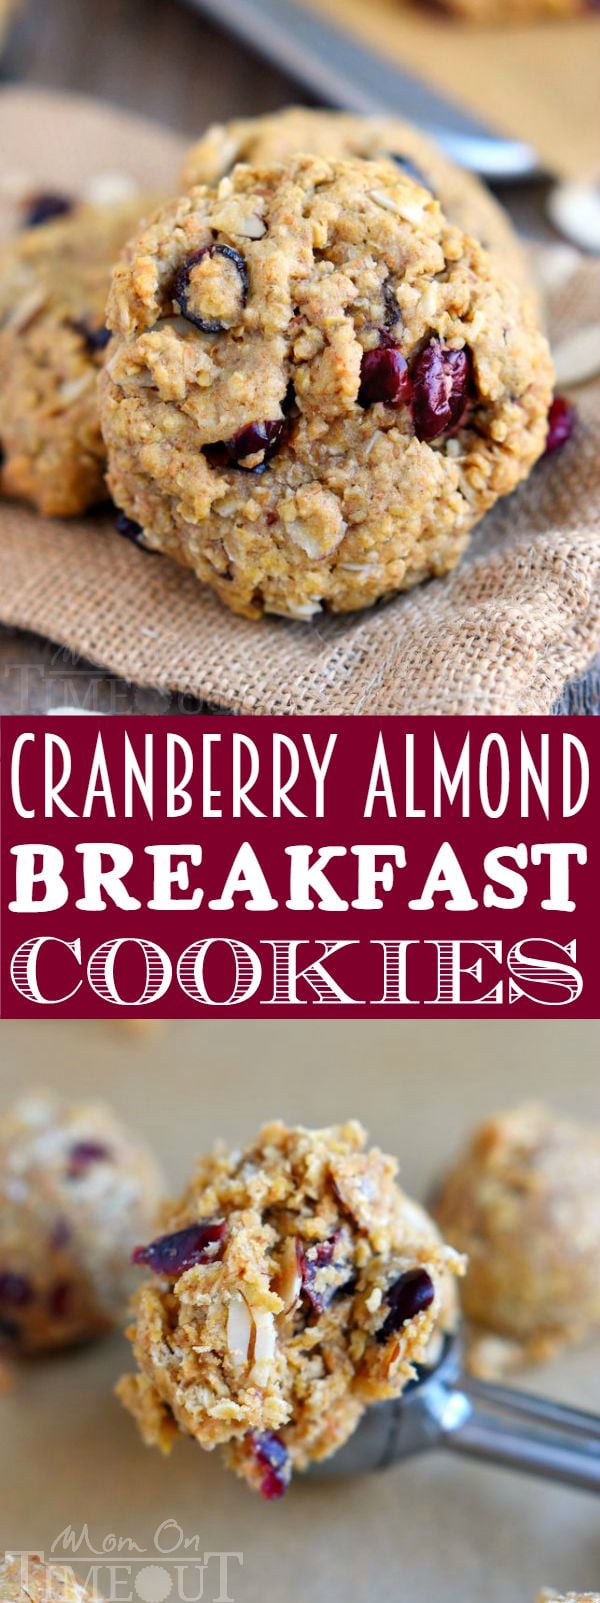 These Cranberry Almond Breakfast Cookies are the perfect grab-and-go breakfast for busy mornings! Extra-healthy and totally delicious, it's the perfect excuse to eat dessert for breakfast!